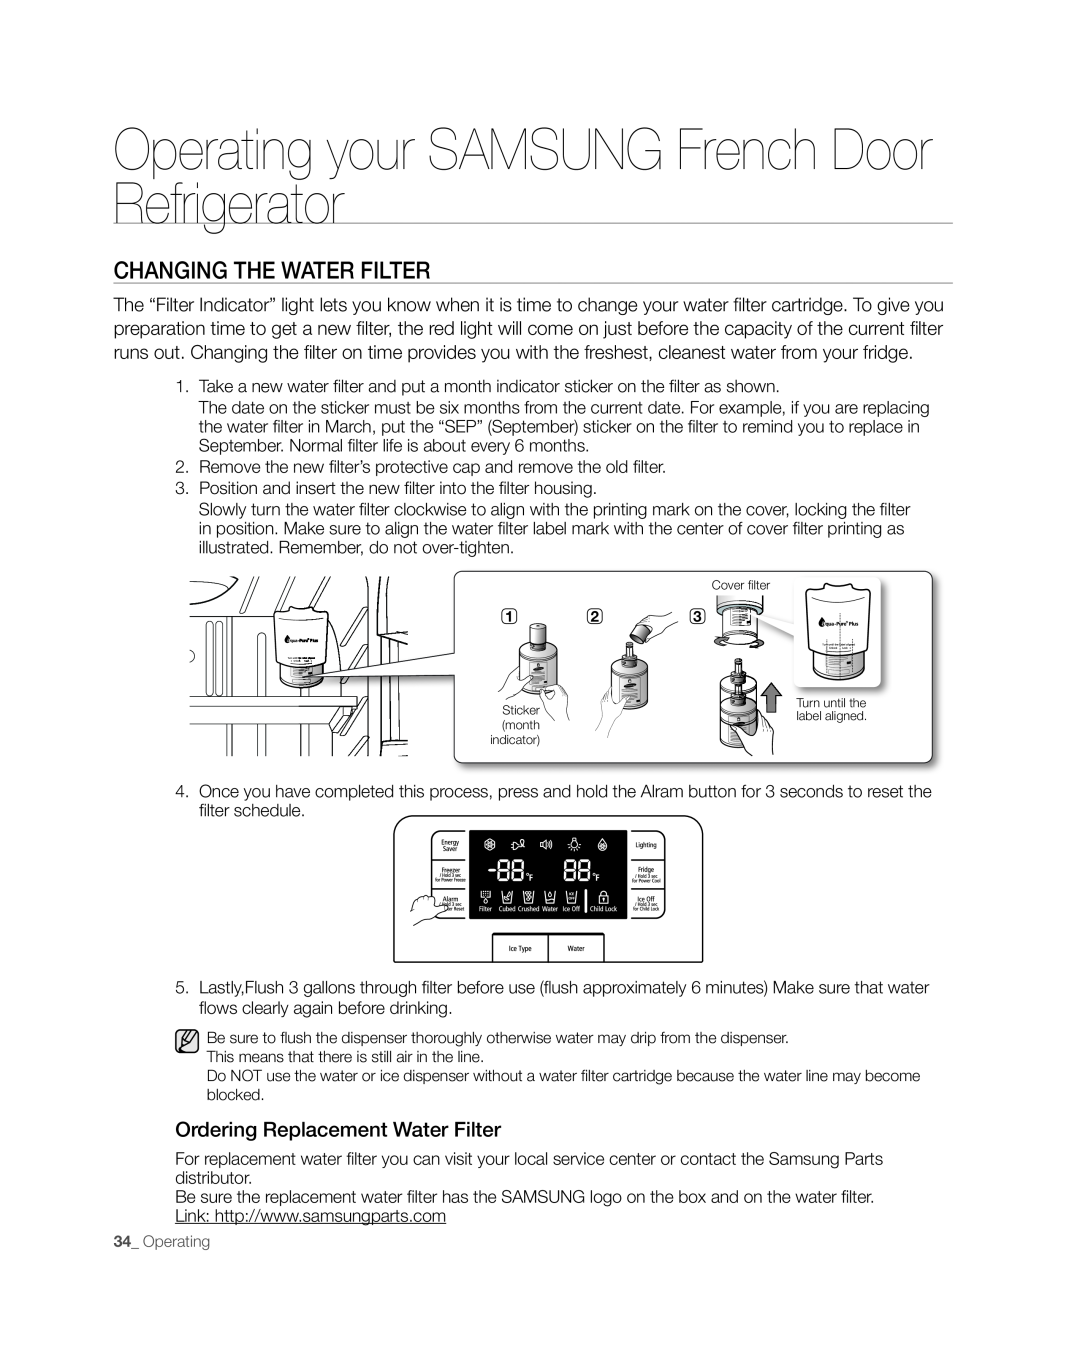 Samsung RFG297AAWP user manual CHAnGinG tHE wAtER FiltER, Operating your SAMSUNG French Door Refrigerator 